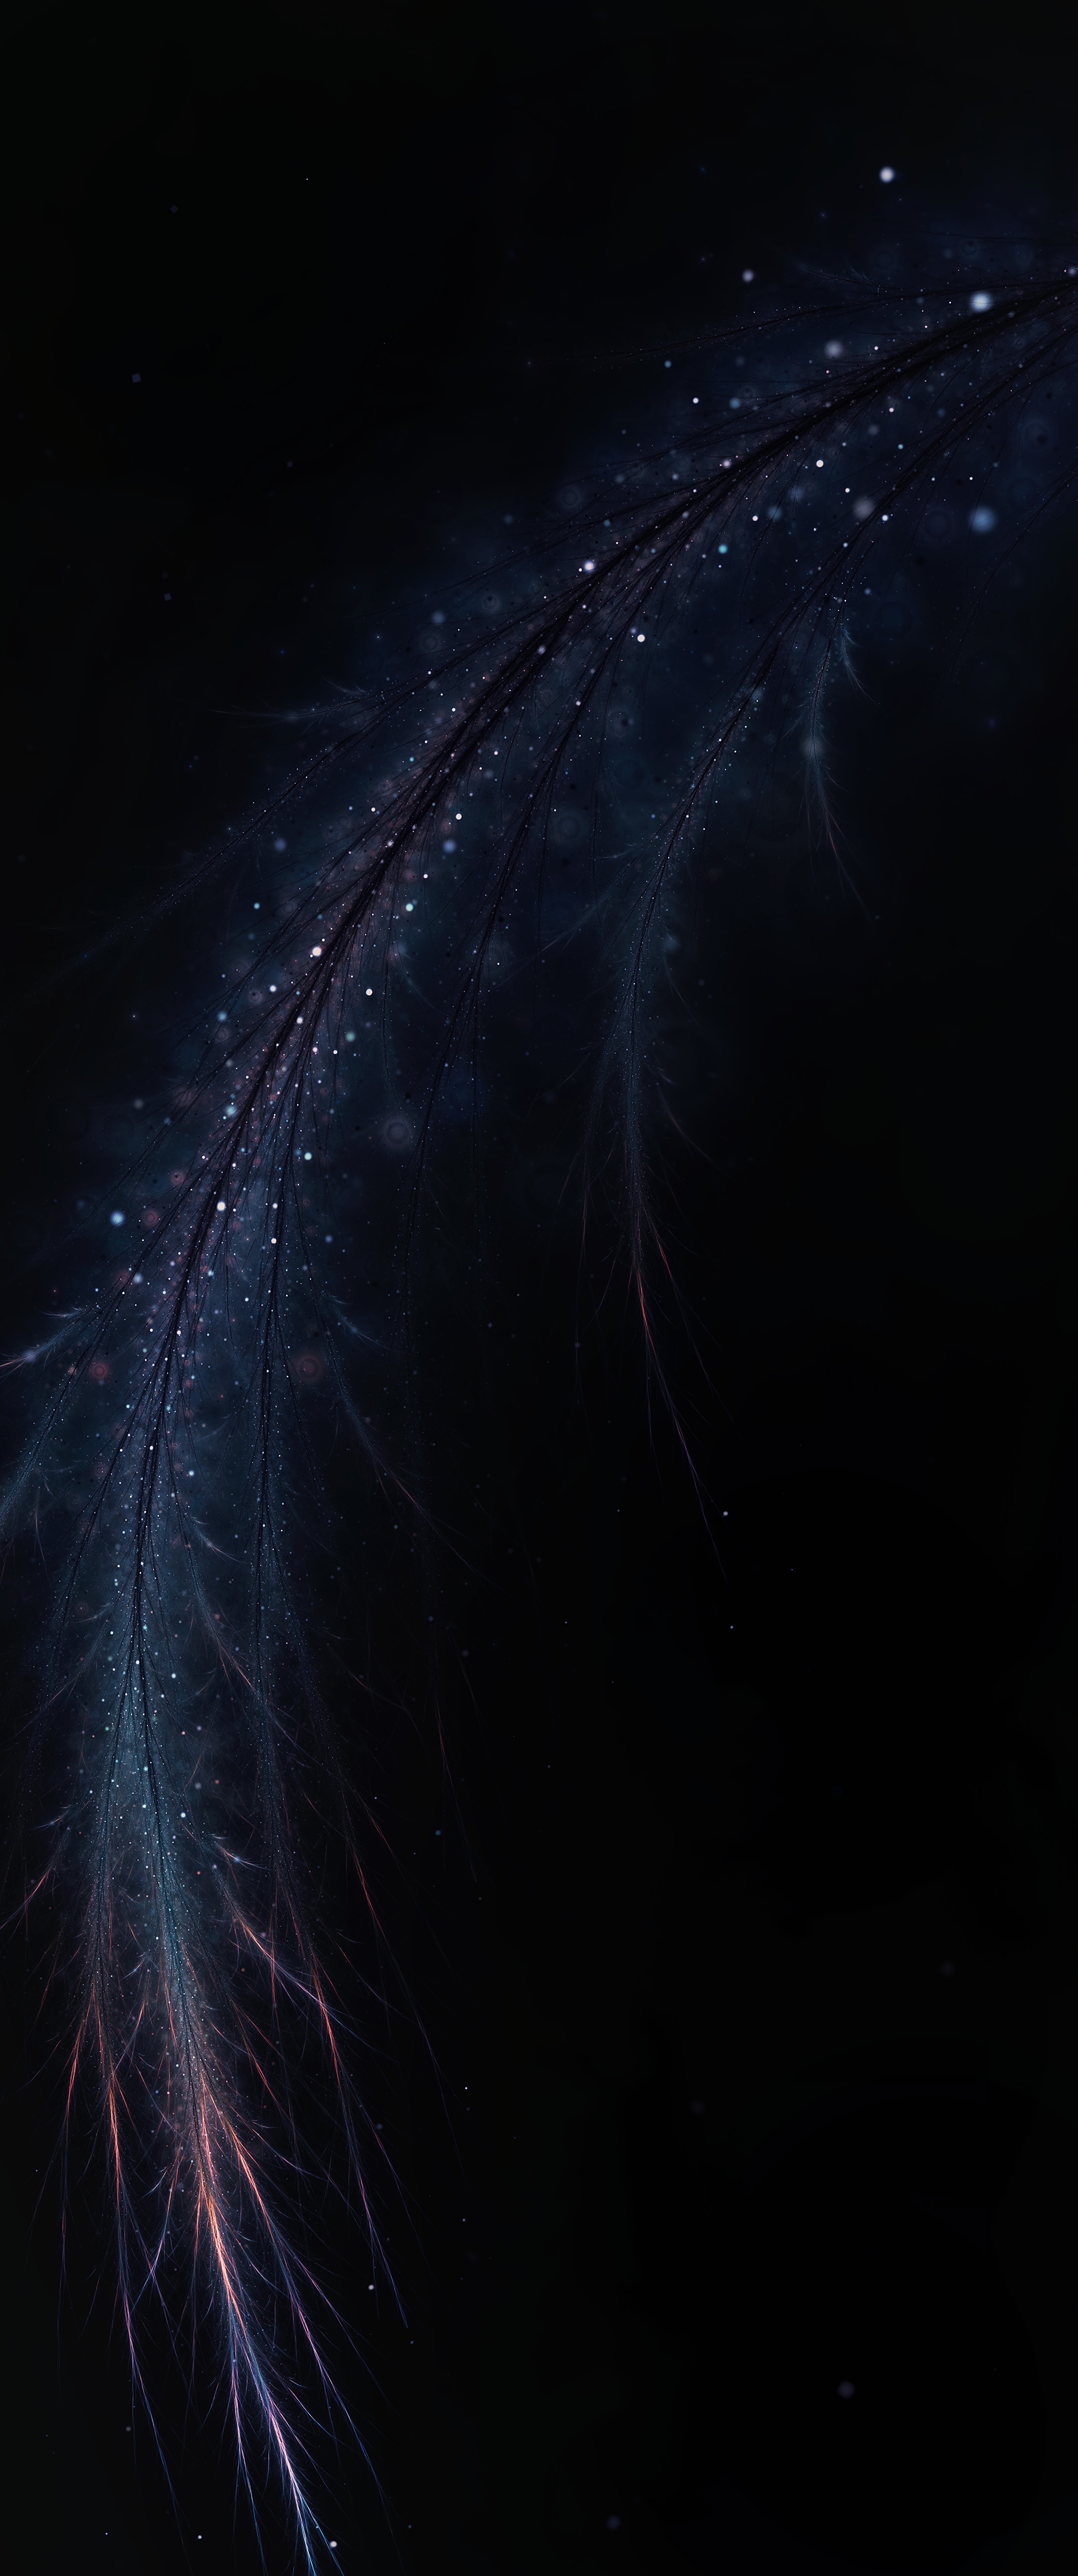 dark, abstract, feather, fractal, shine, brilliance, branch, pen Free Stock Photo